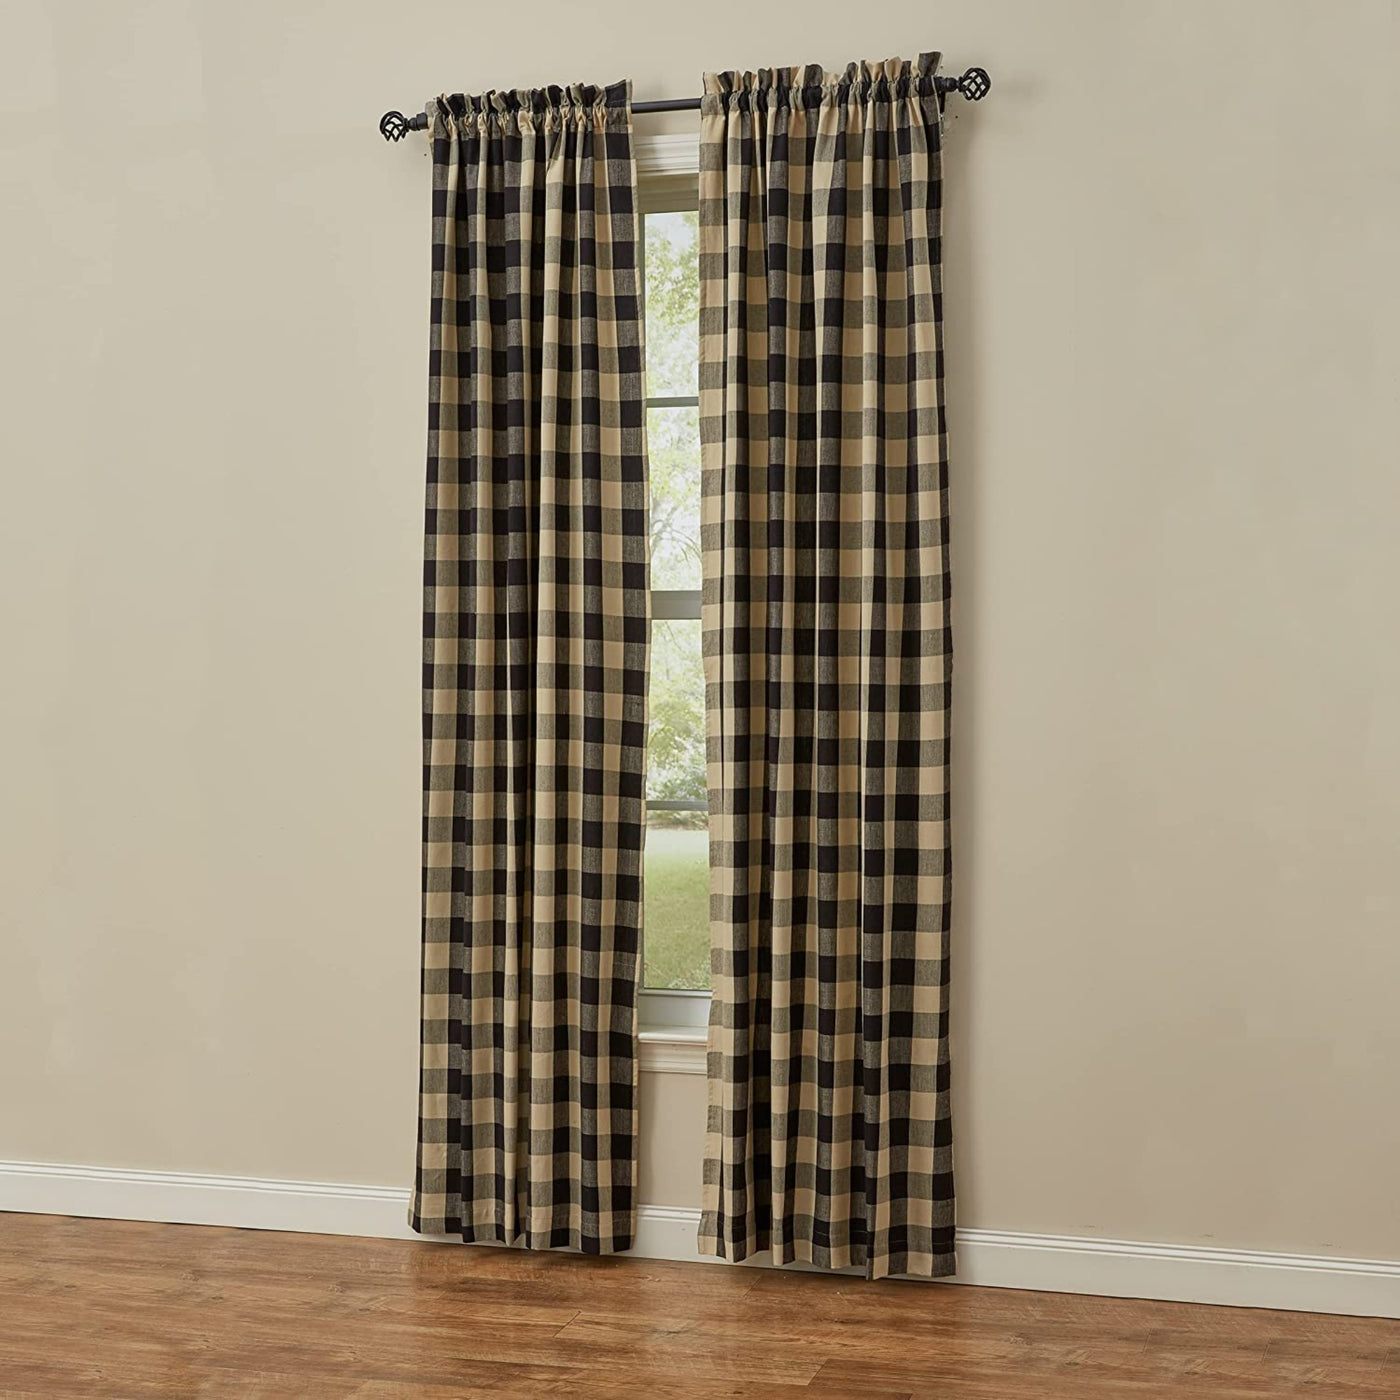 Wicklow Check Black & Tan Lined Panels